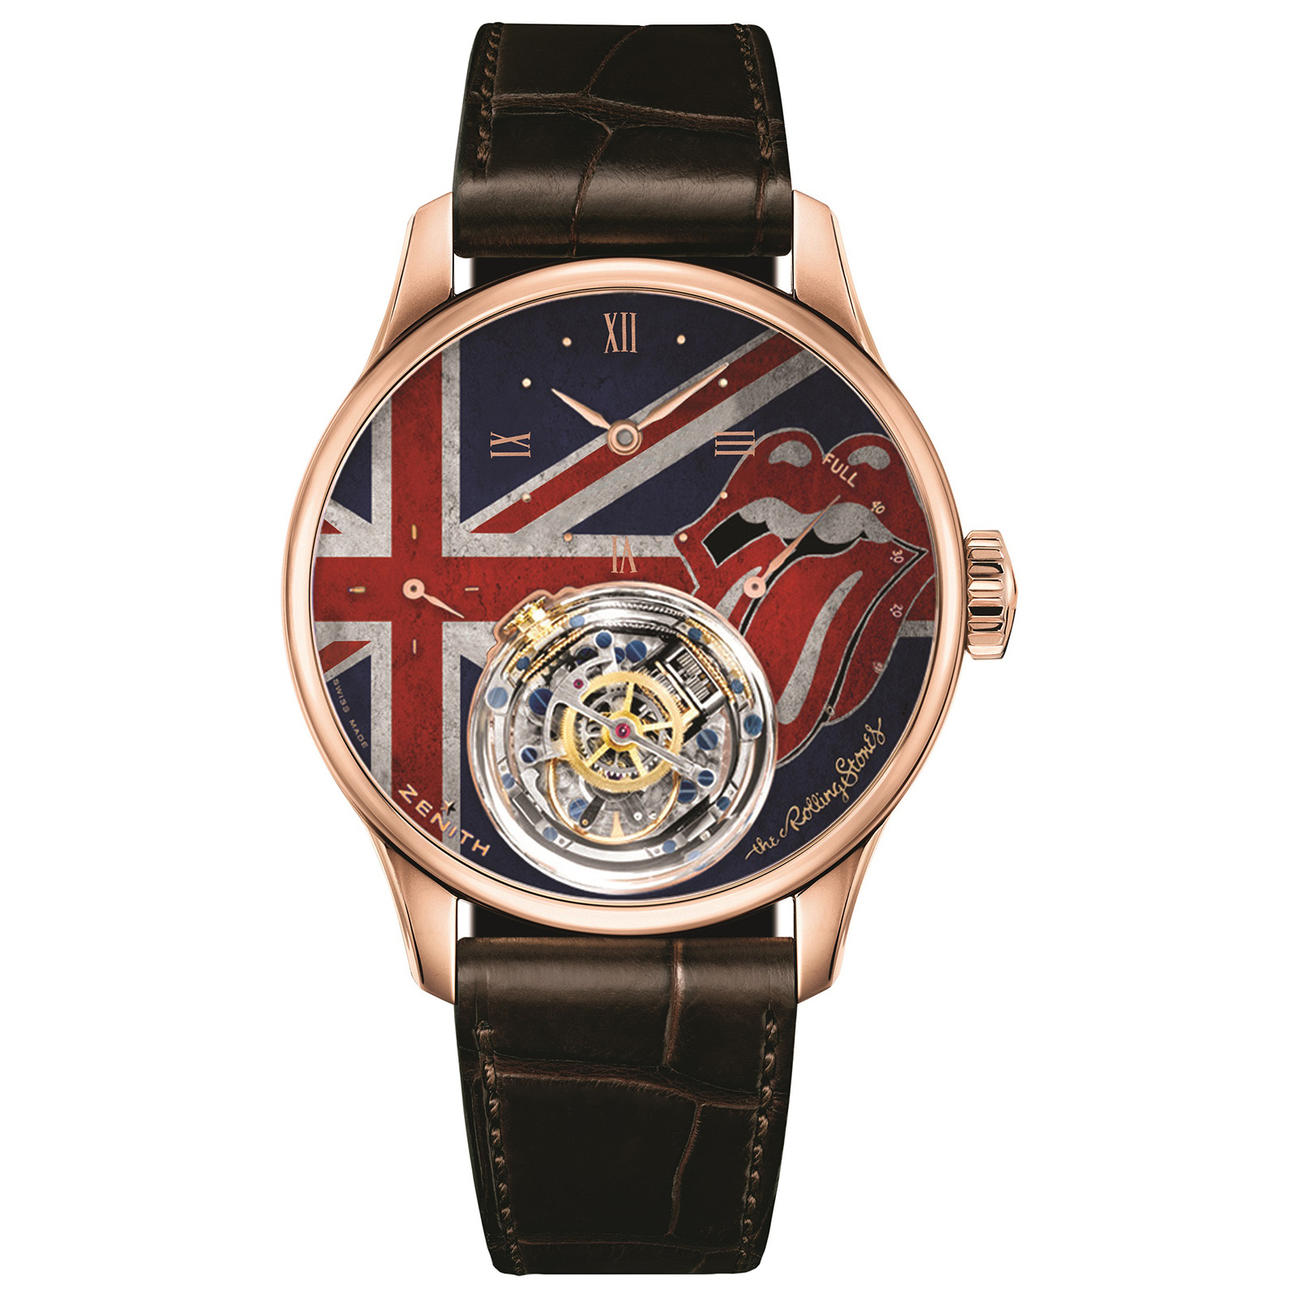 How do you perceive Zenith watches? - Page 3 - Watches - PistonHeads